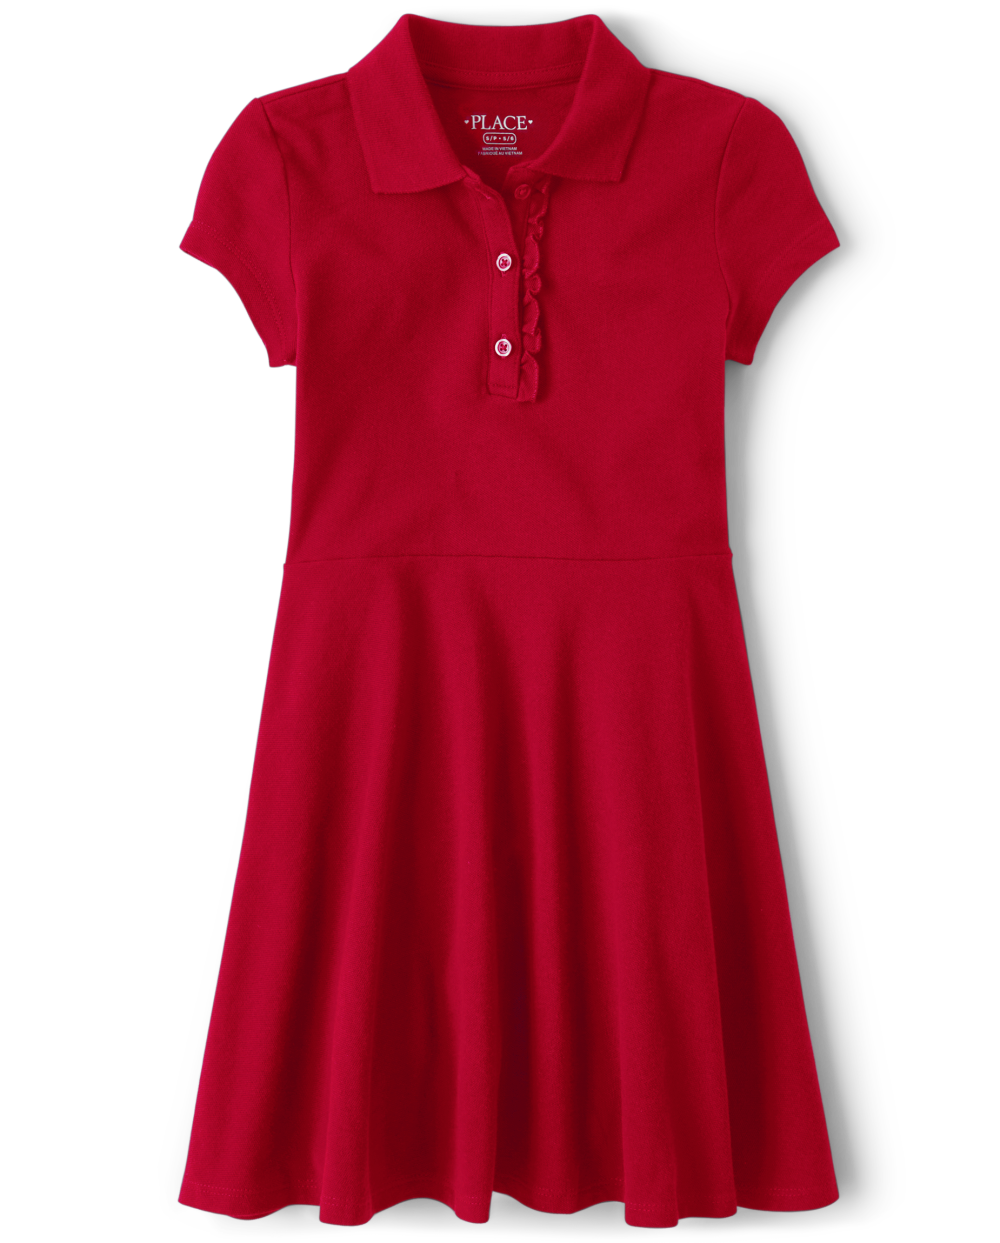 Girls Short Sleeves Sleeves Ruffle Trim Collared Above the Knee Dress